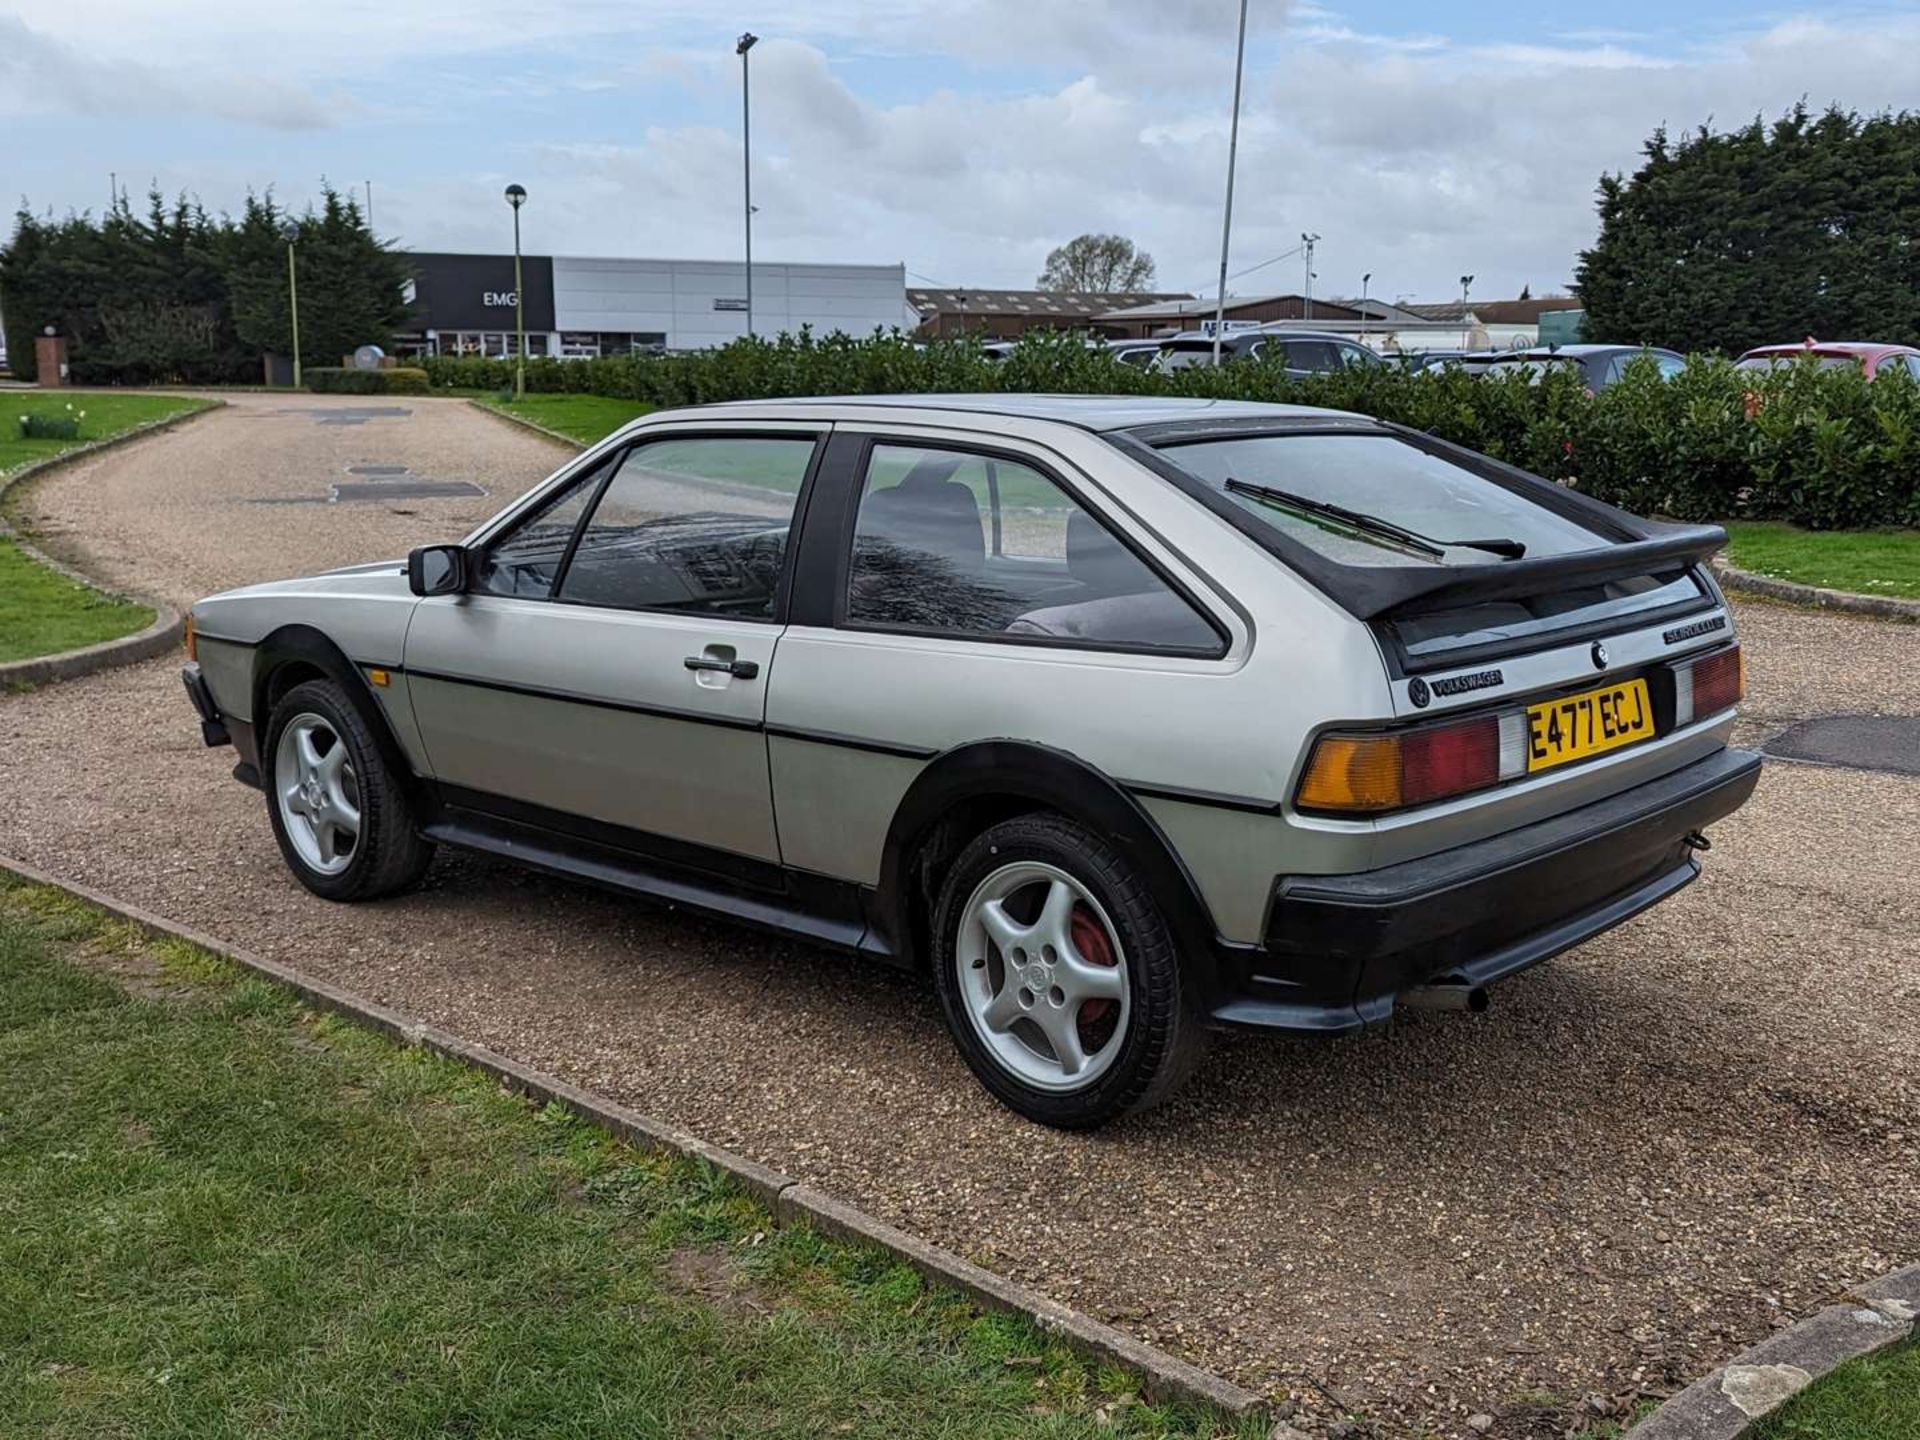 1987 VW SCIROCCO GT - Image 5 of 28